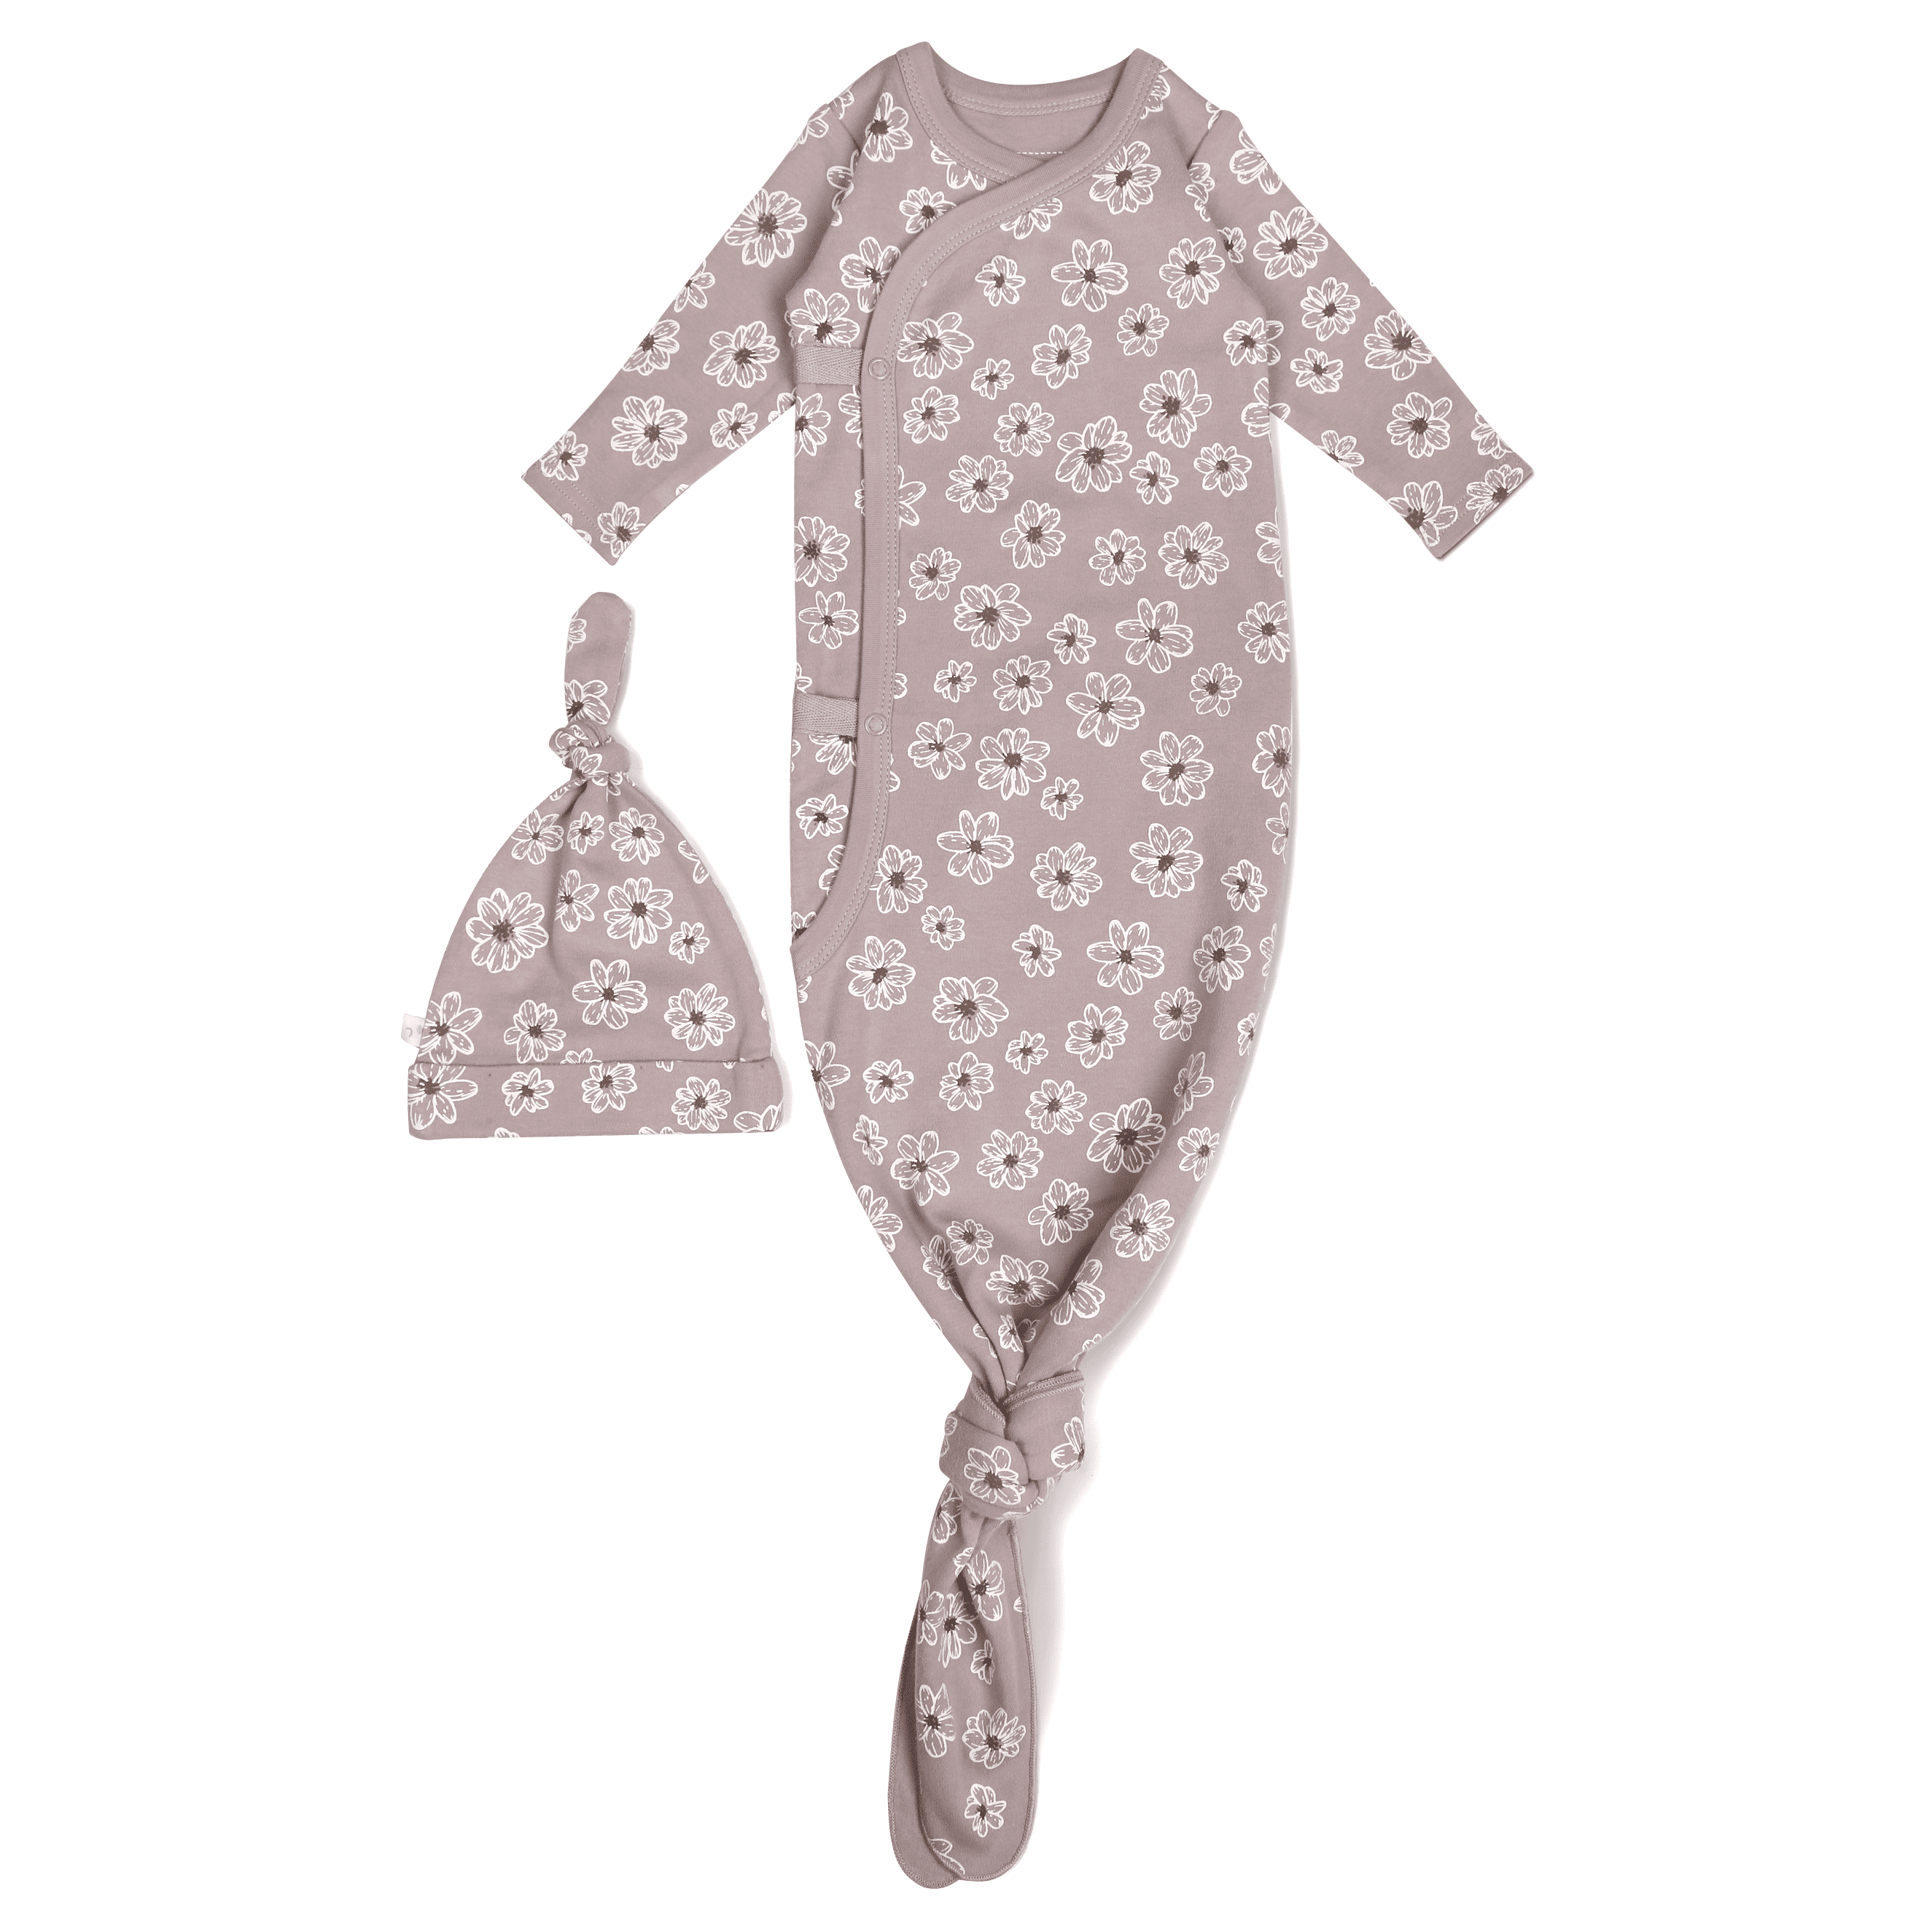 A beige toddler sleeper with a floral pattern and snap closures, paired with a matching knotted hat, displayed on a white background. The Organic Kimono Knotted Sleep Gown - Daisies by Makemake Organics.